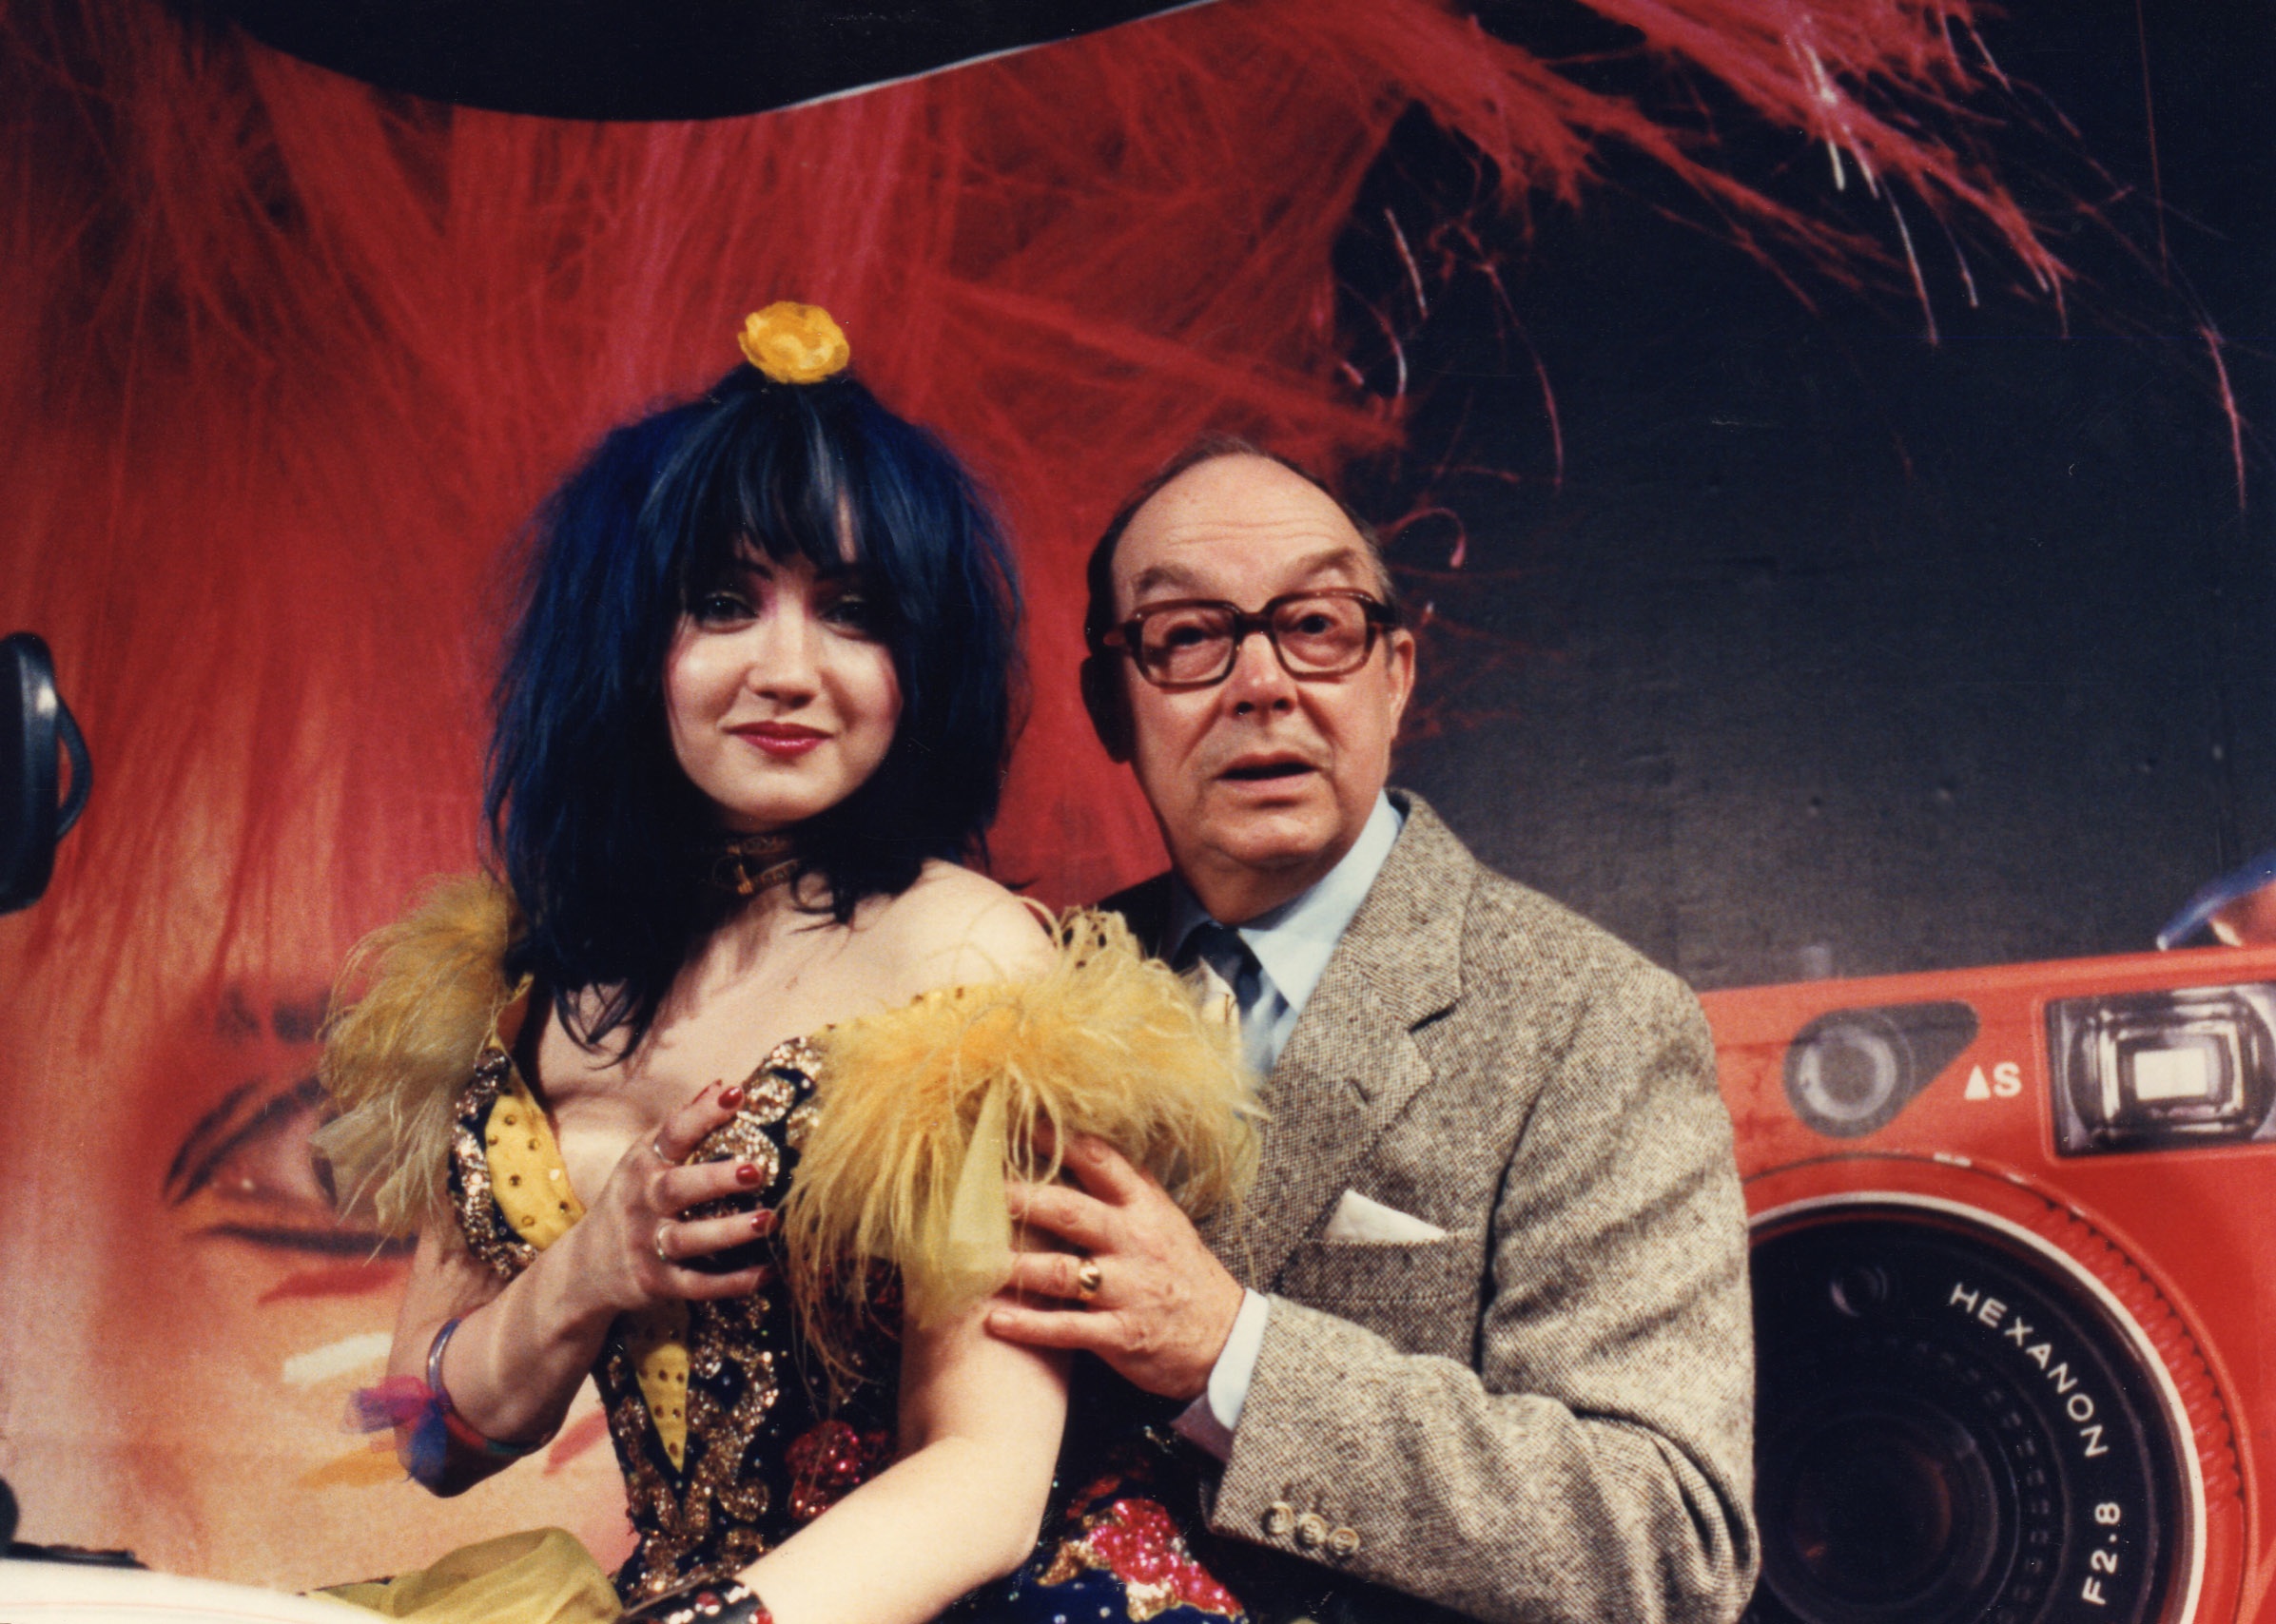 Barbie Wilde with Eric Morecambe at London's Olympia Exhibition Centre. Early 80s.